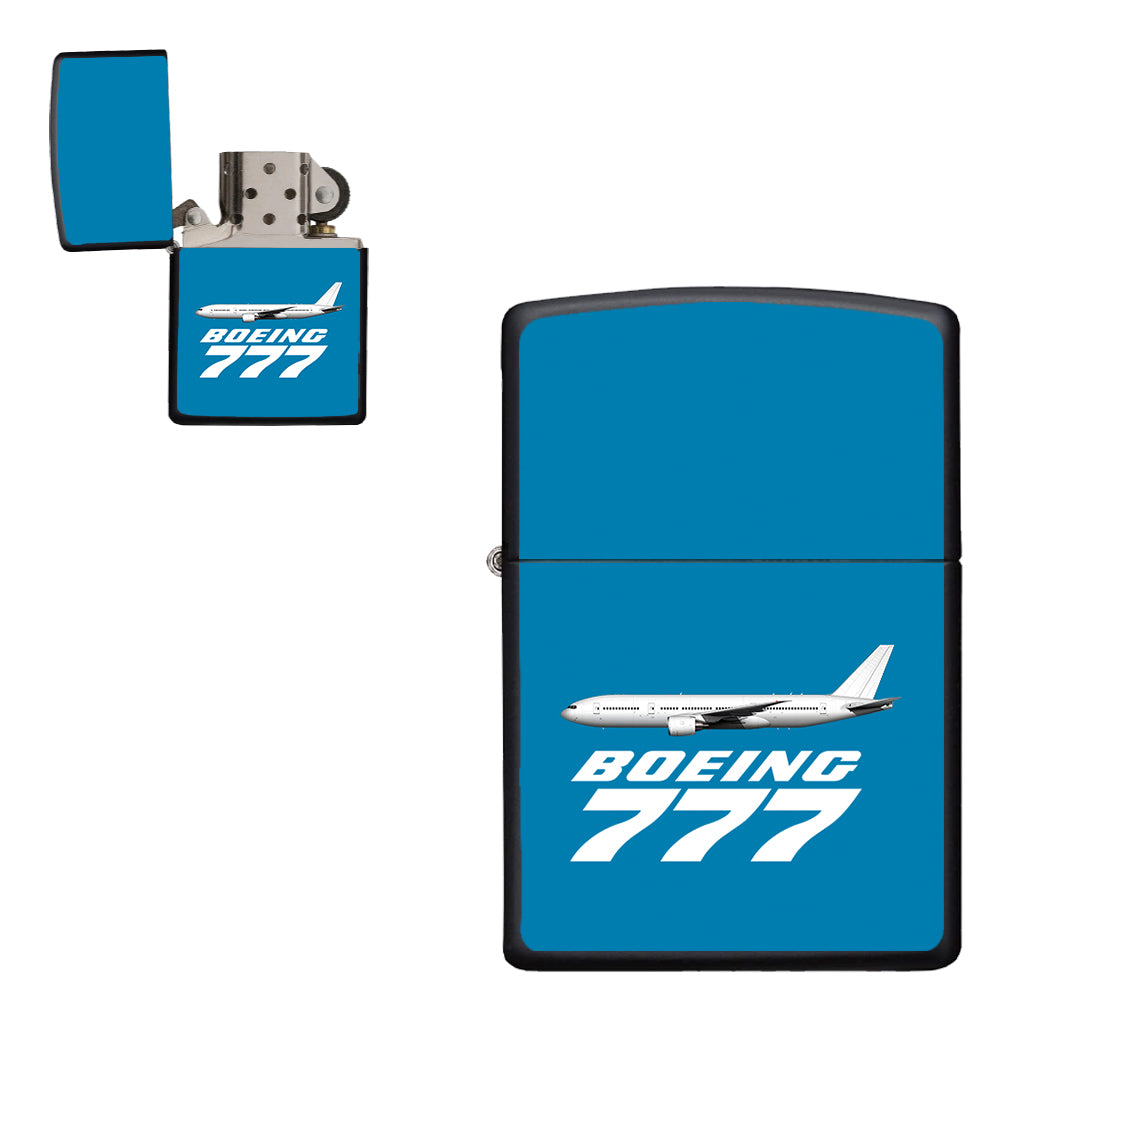 The Boeing 777 Designed Metal Lighters